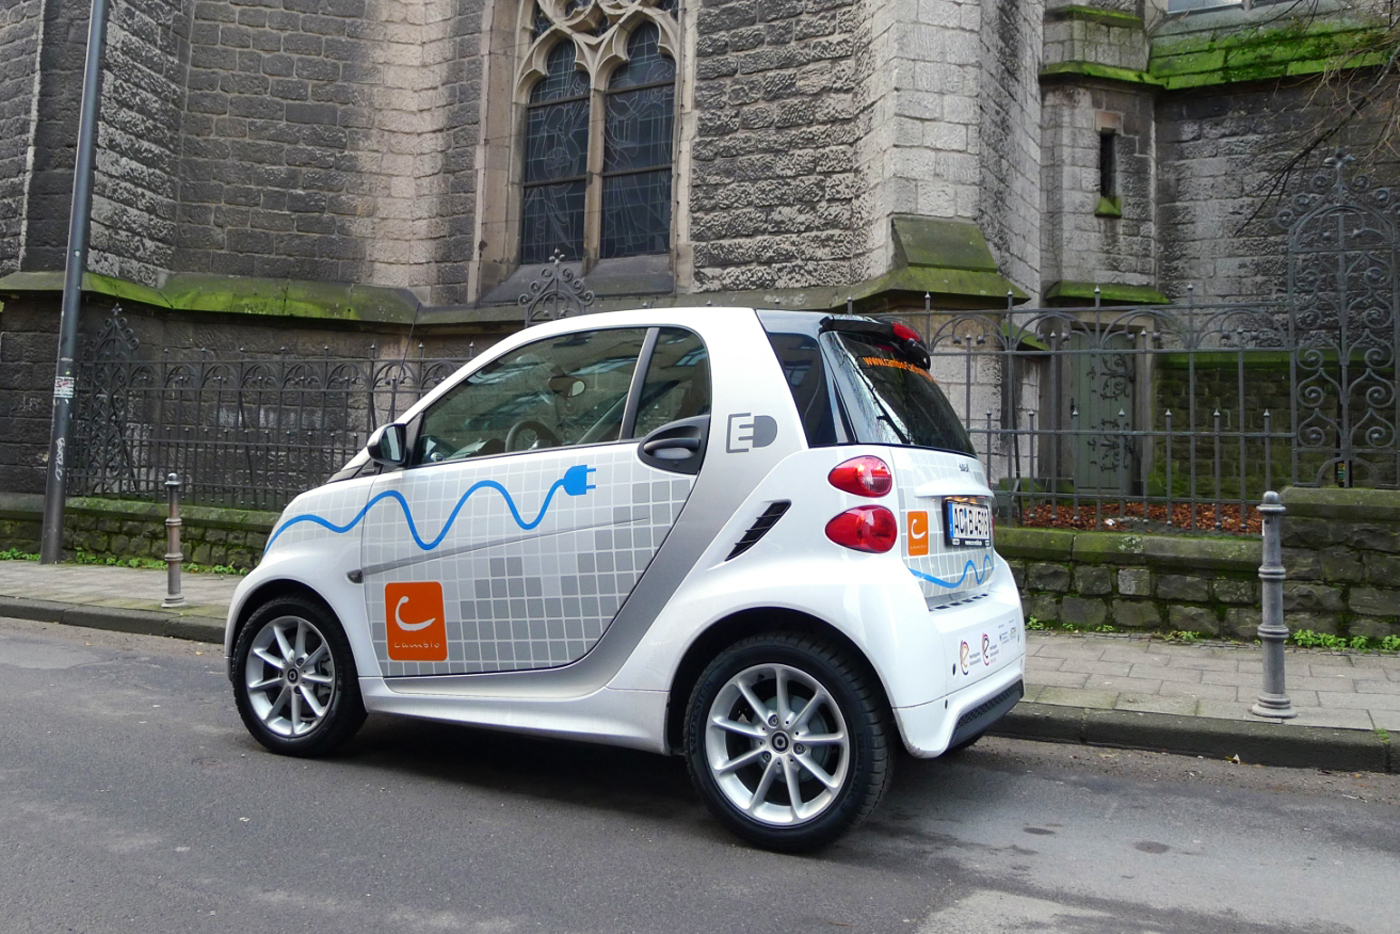 cambio CarSharing e-mobil